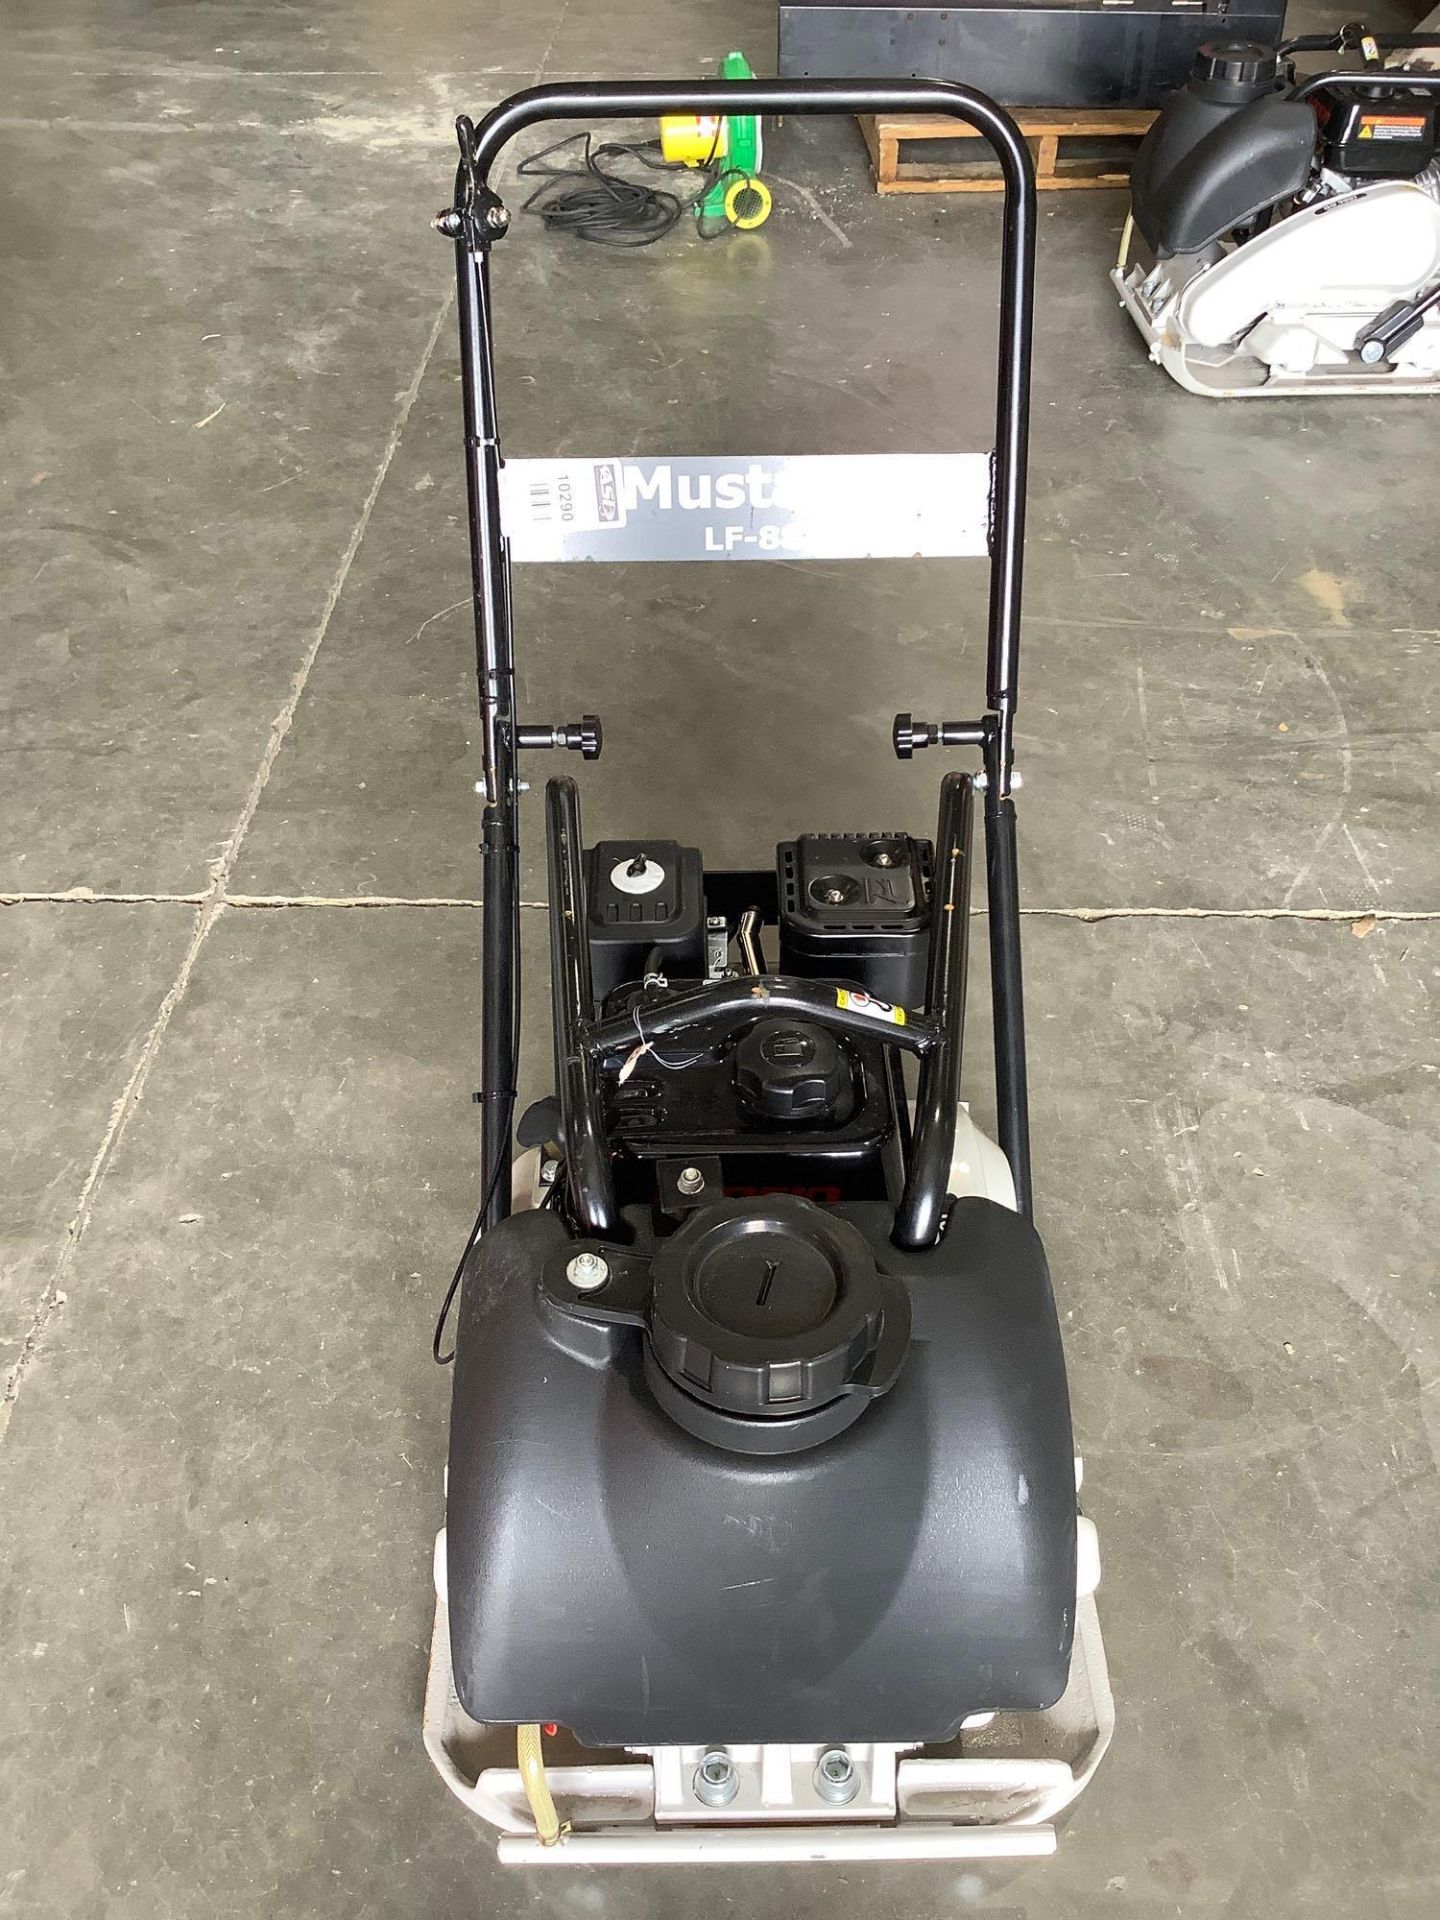 UNUSED MUSTANG LF-88 PLATE COMPACTOR WITH LONCIN 196cc ENGINE, GAS POWERED - Image 10 of 12